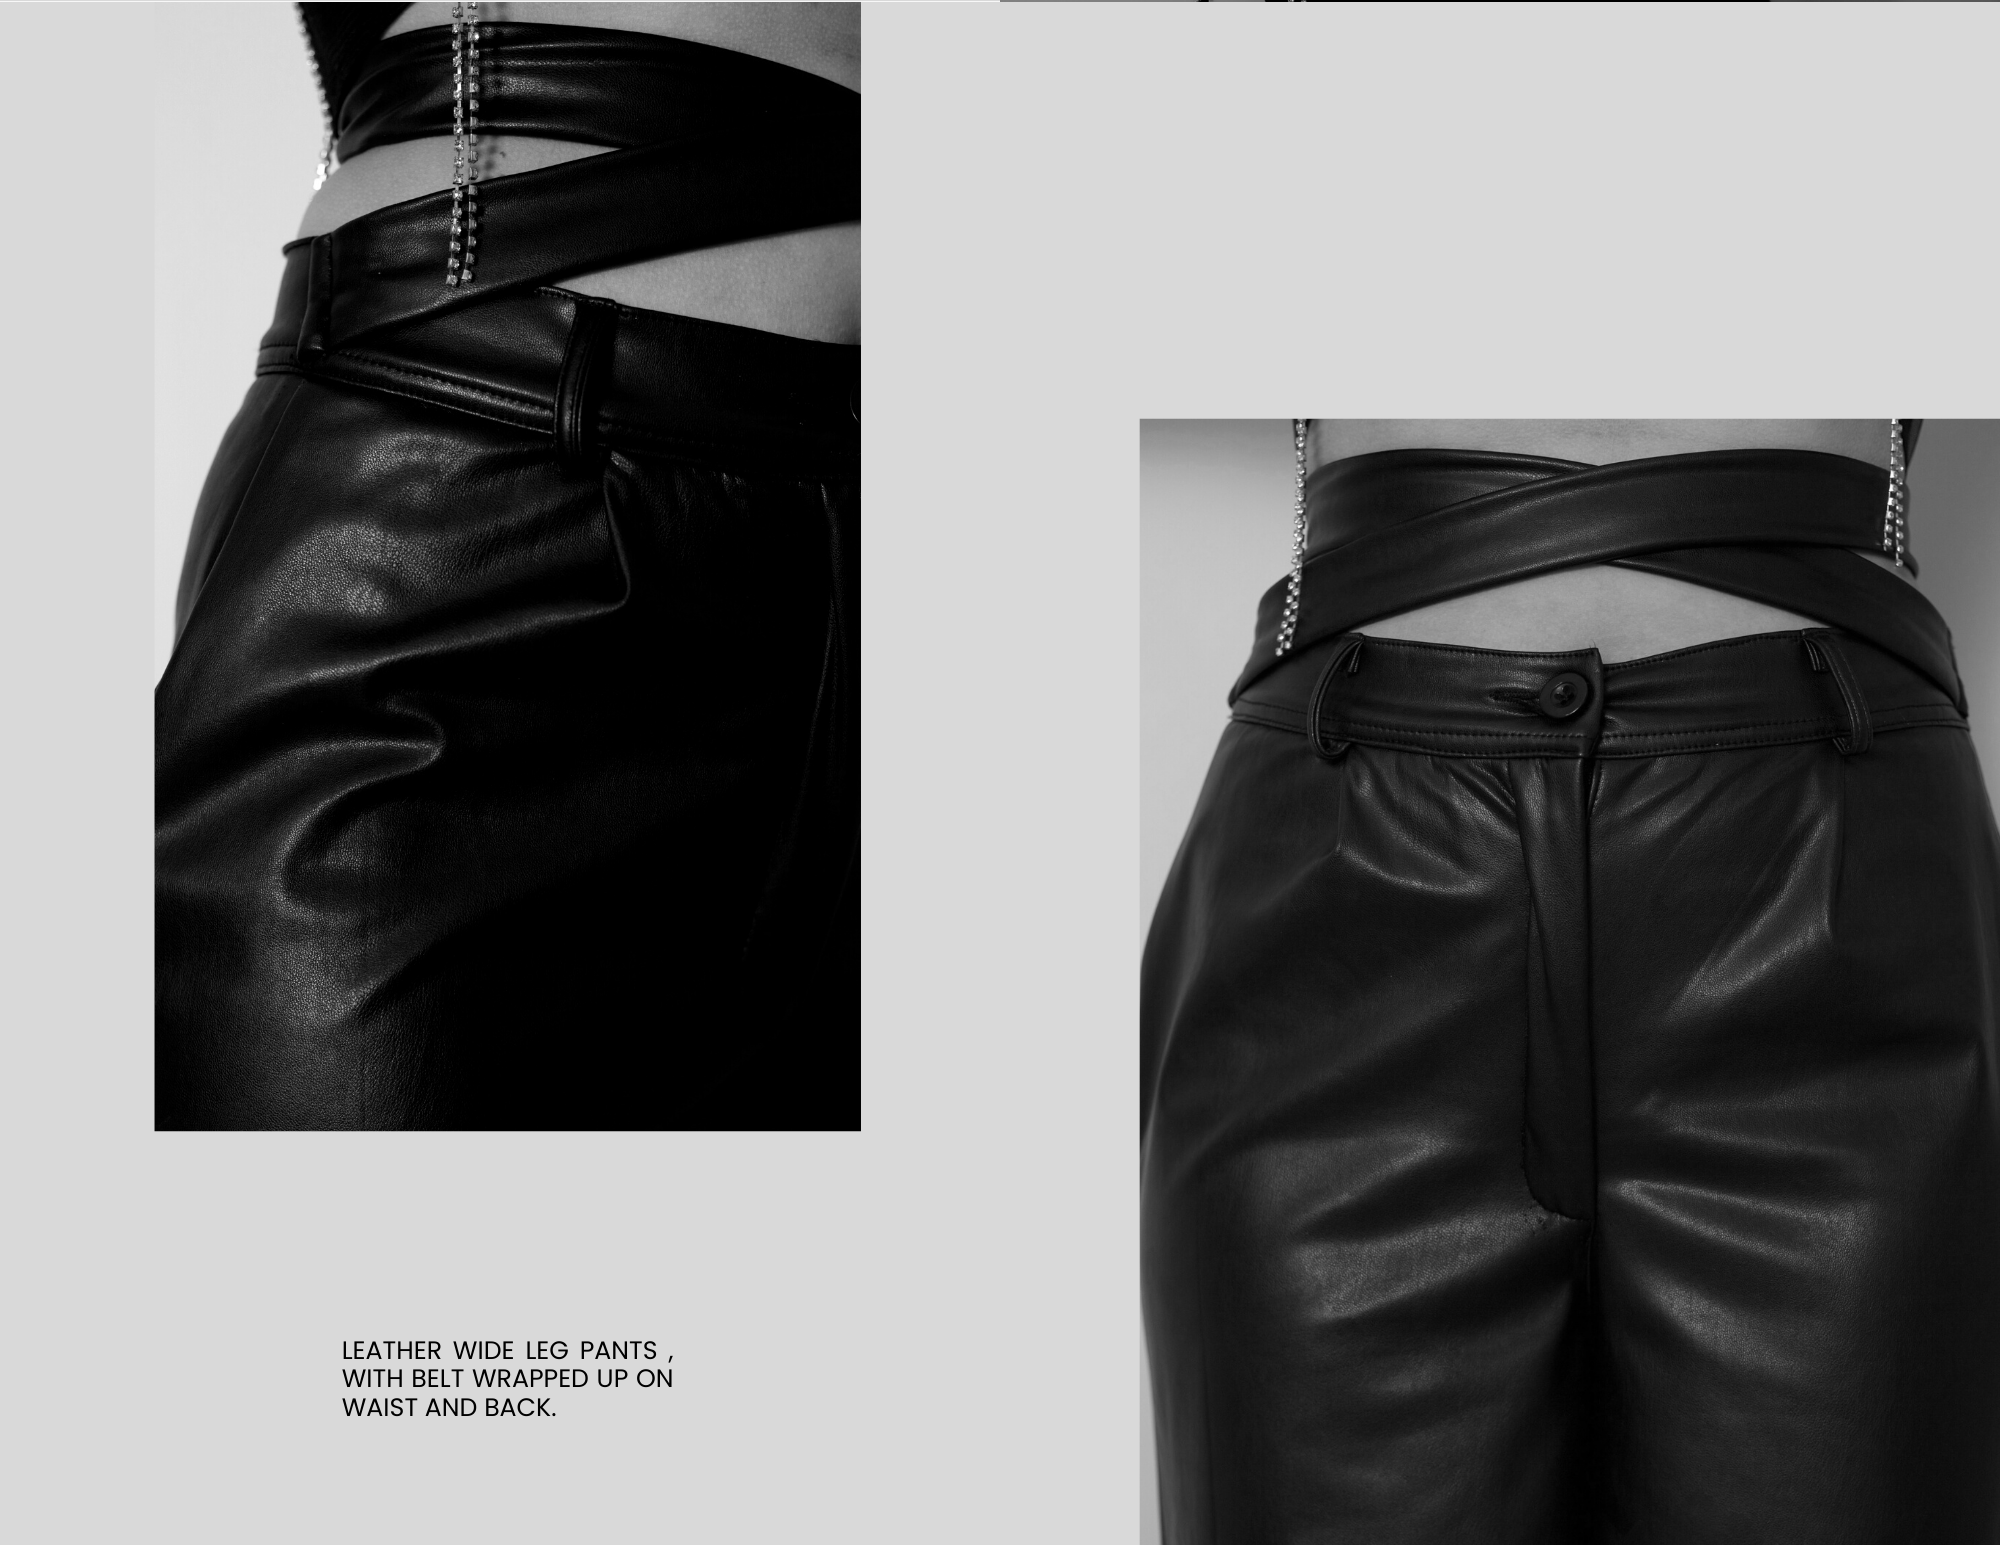 AAA

;

LEATHER WIDE LEG PANTS ,
WITH BELT WRAPPED UP ON
WAIST AND BACK.